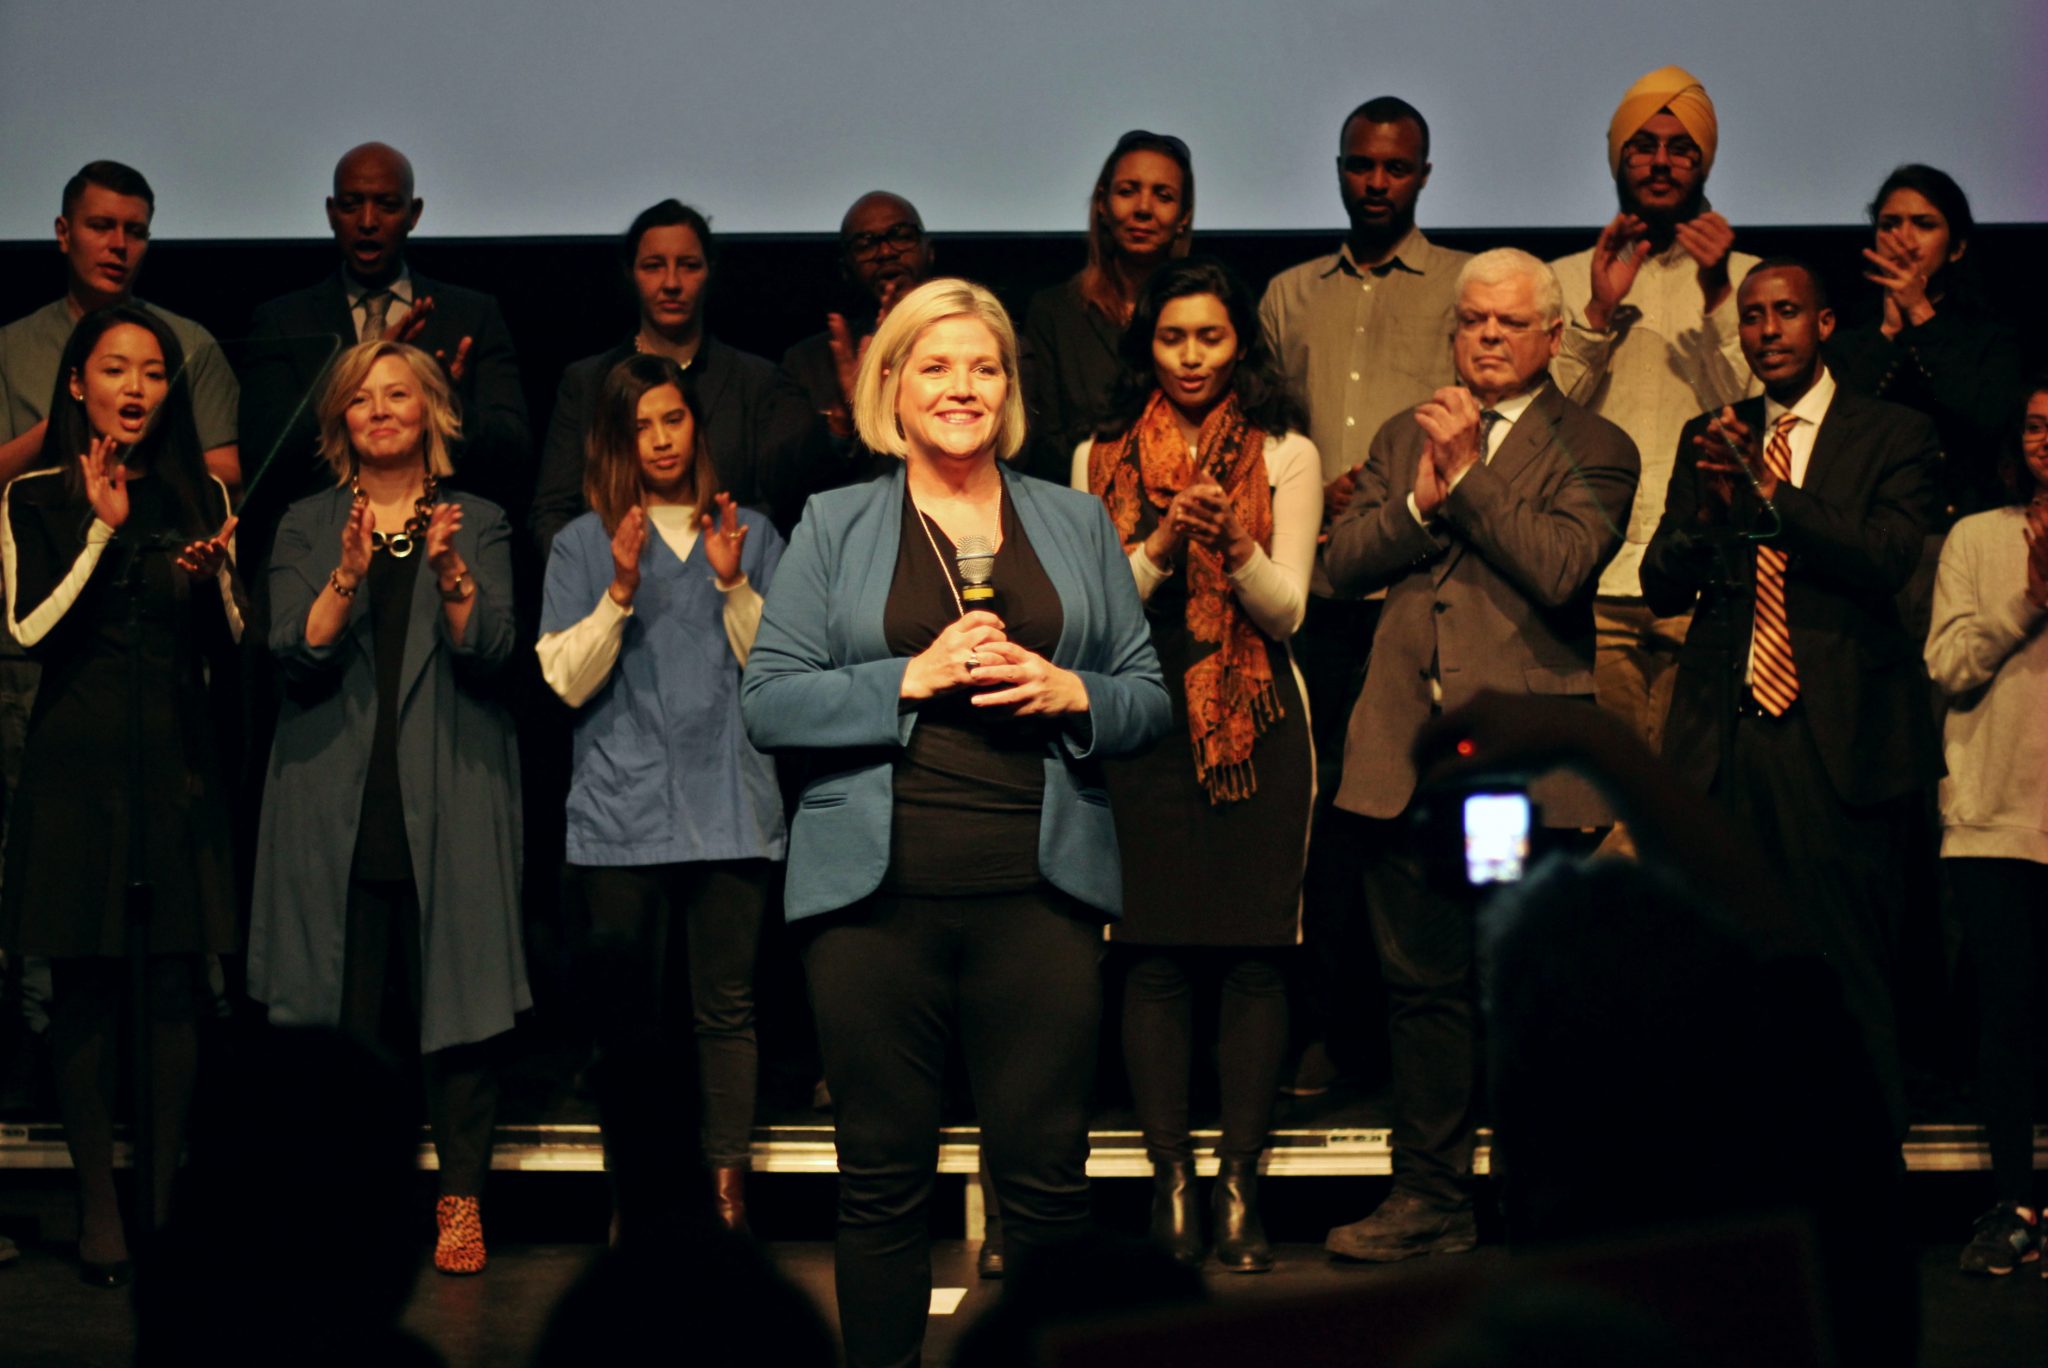 Horwath fires opening salvo in post-campaign landscape